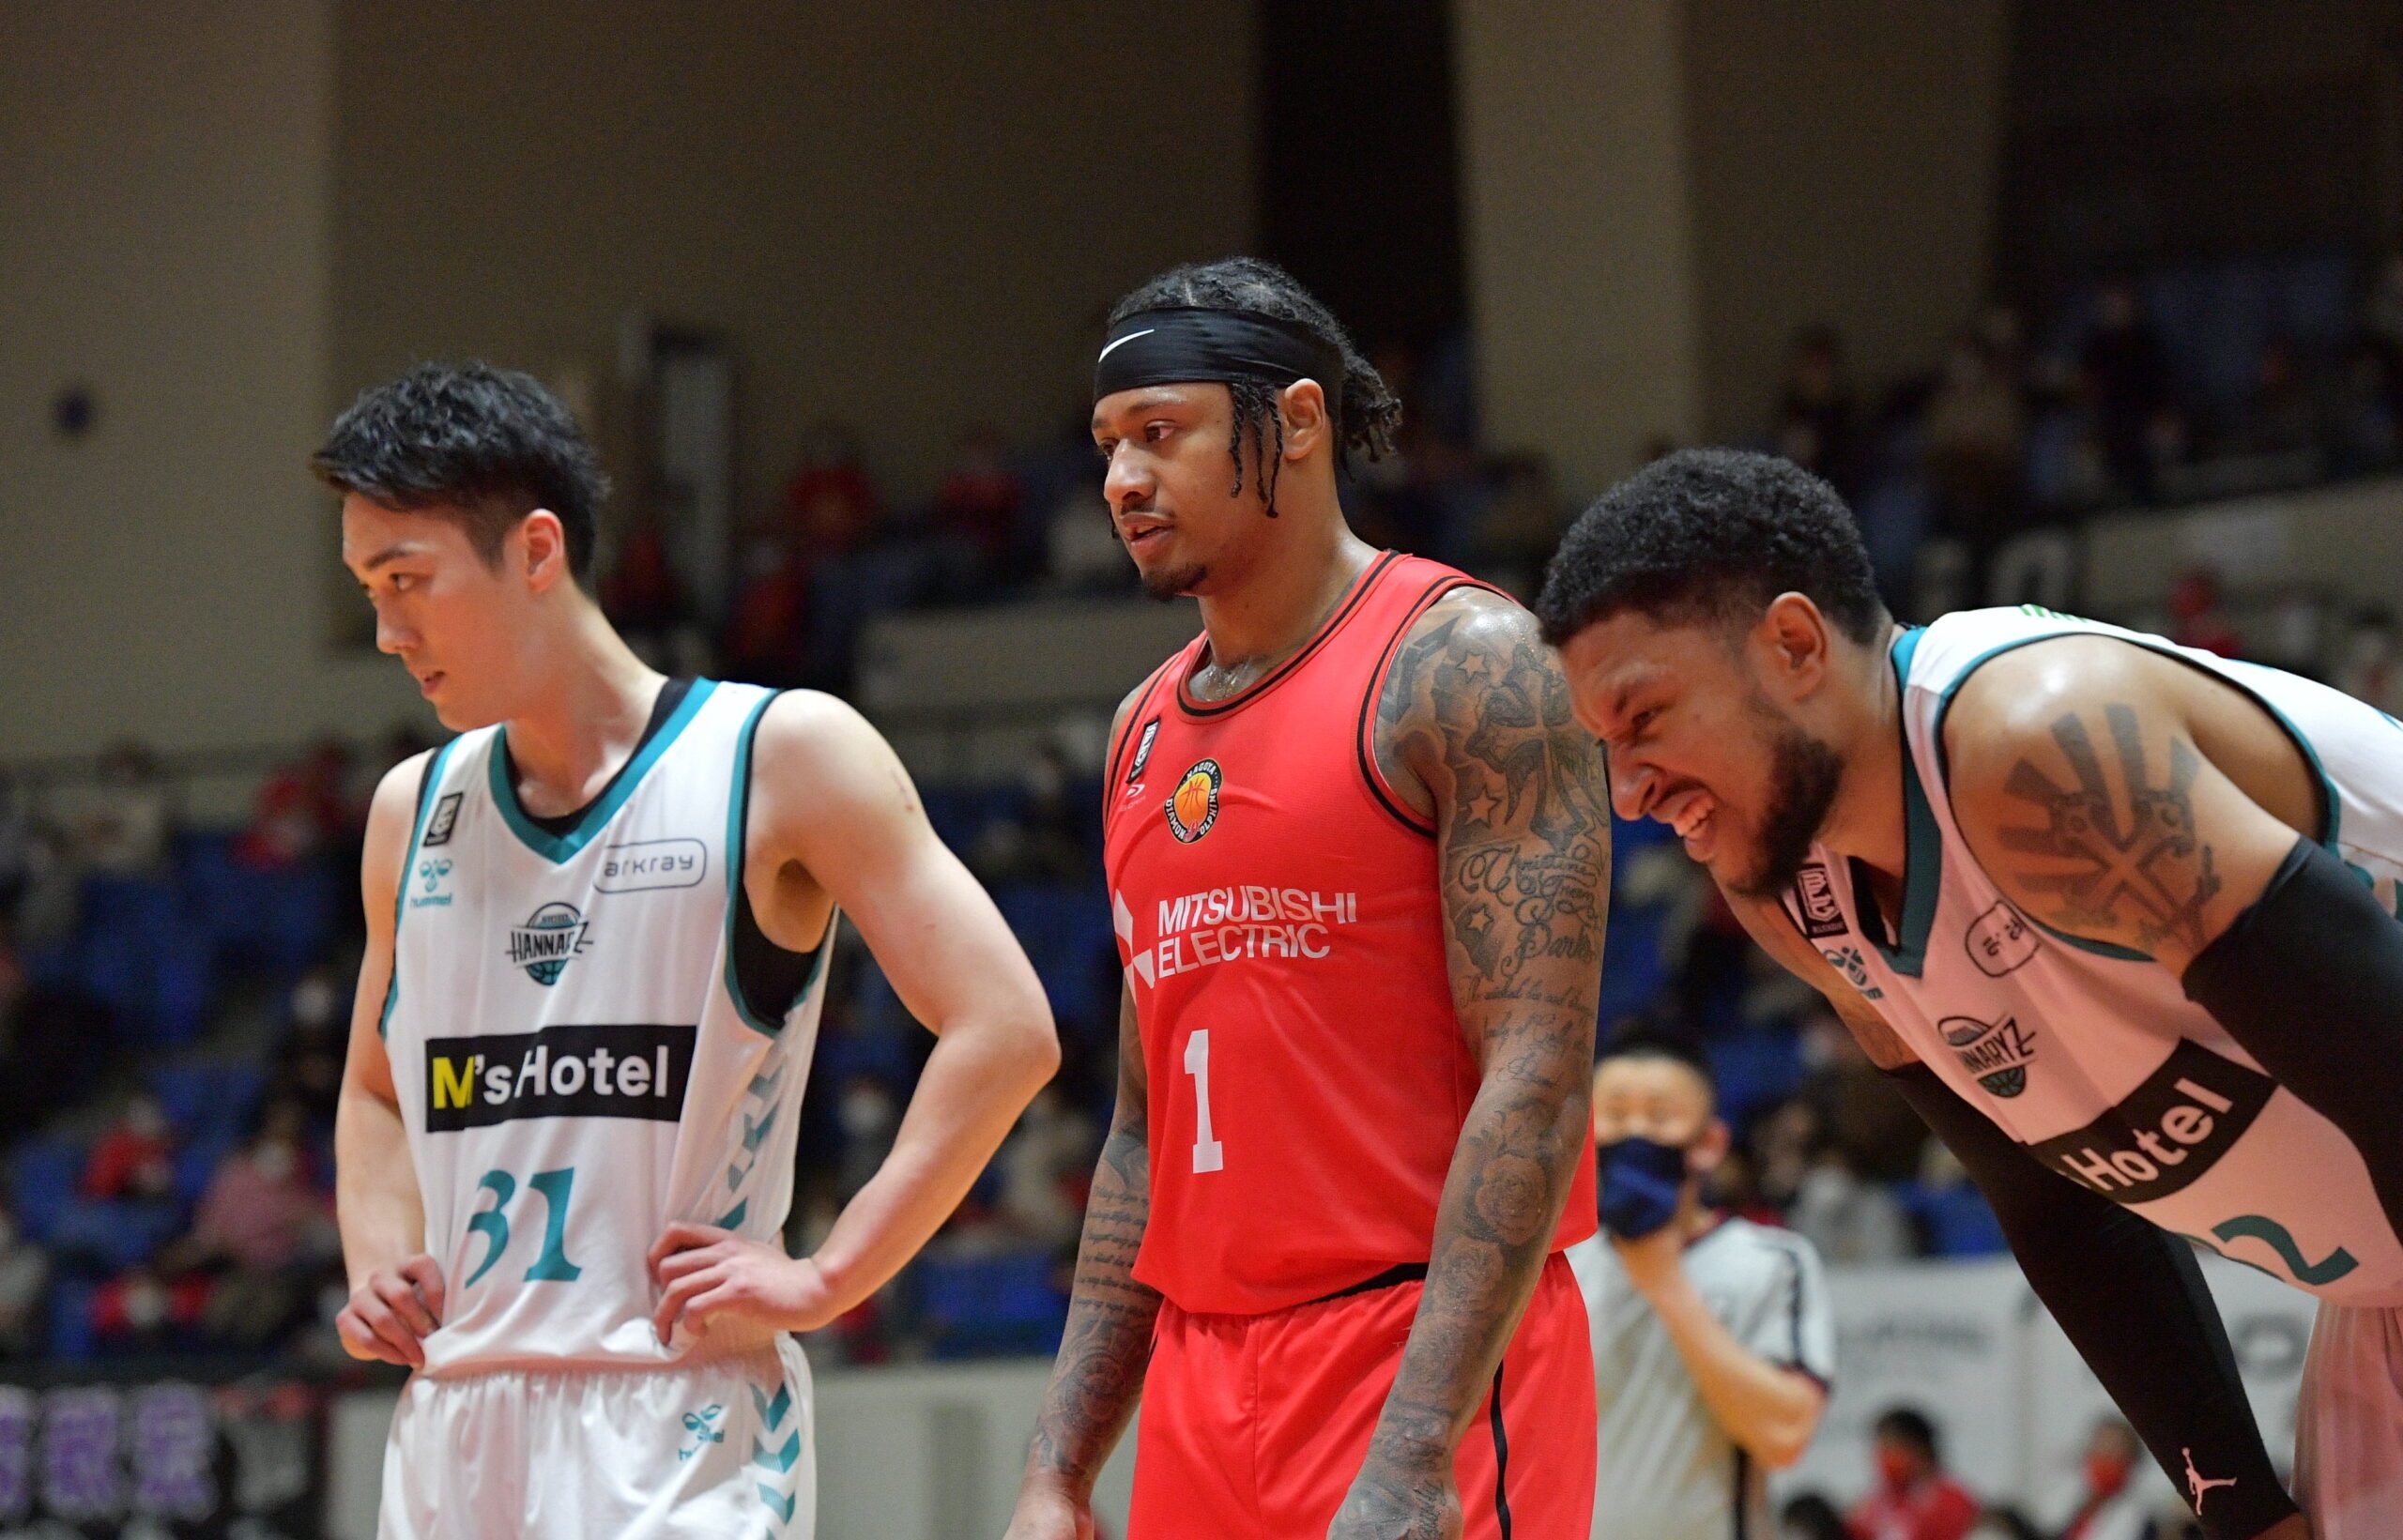 Parks, Nagoya repeat over Kyoto for 7th straight win